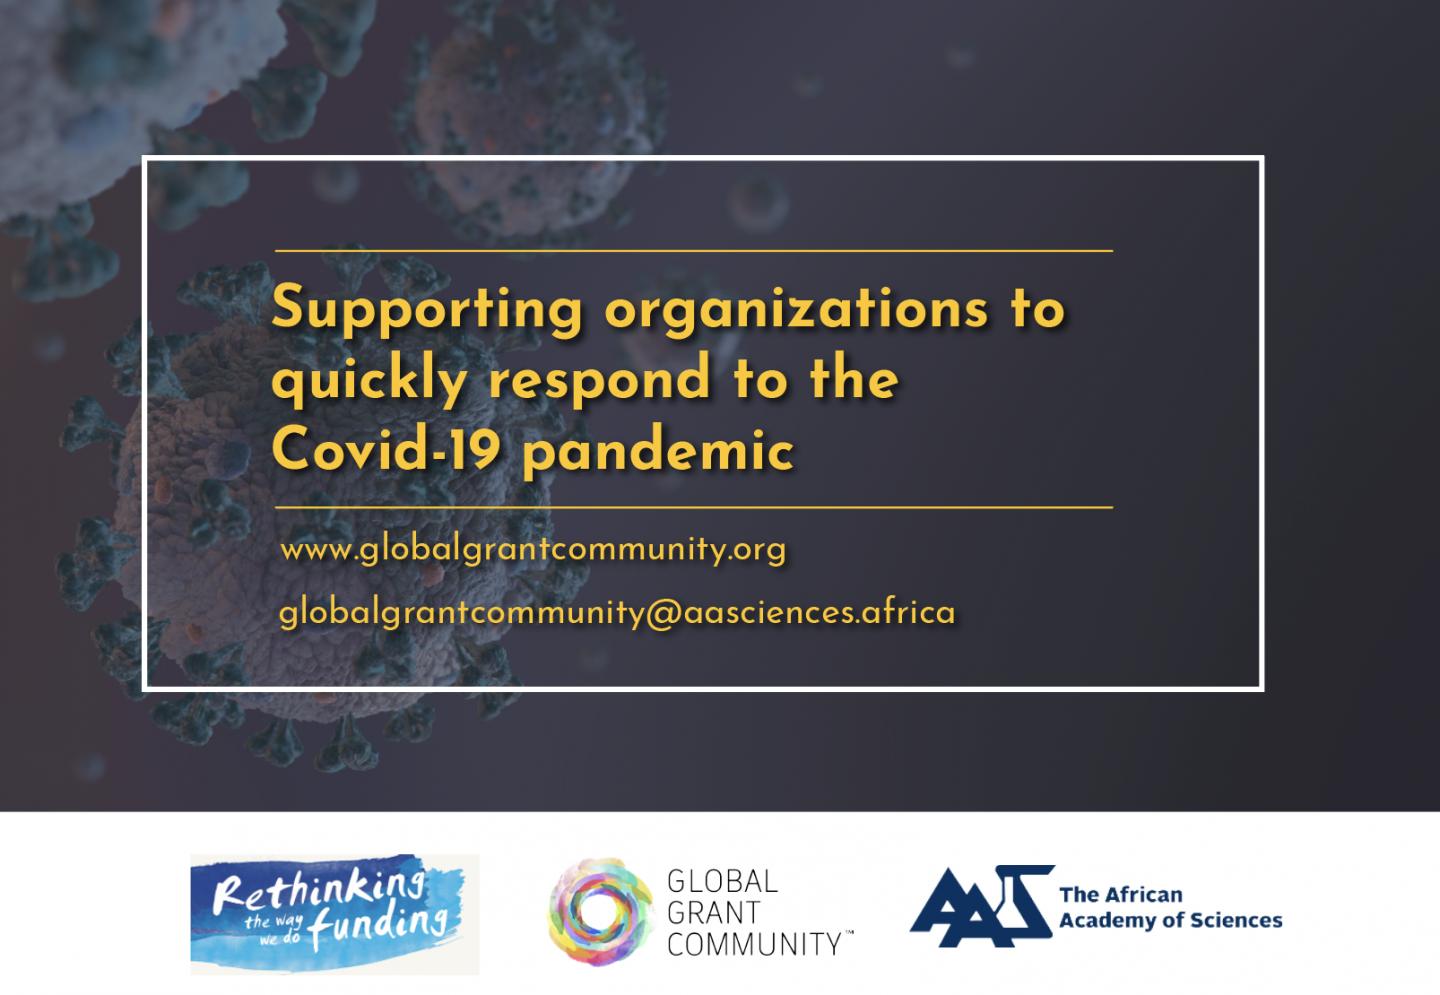 Supporting organizations to quickly respond to the Covid-19 pandemic